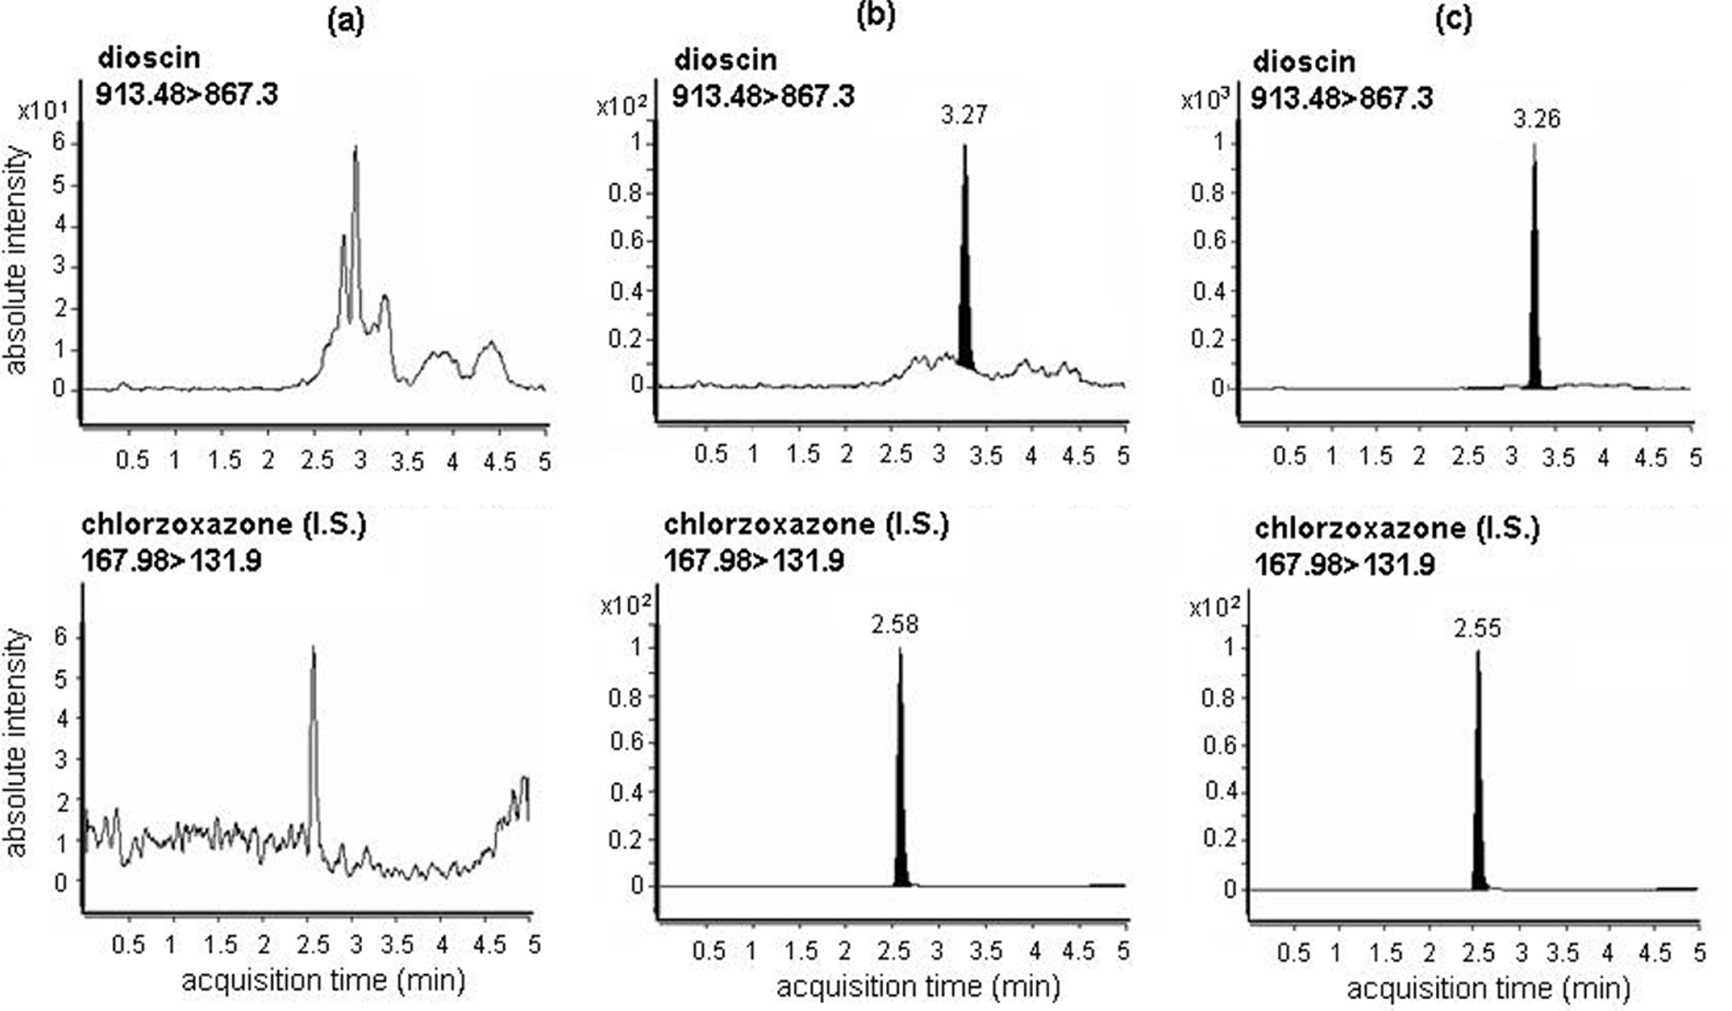 SRM chromatograms of (a) a rat blank plasma, (b) a rat plasma sample spiked with 1 ng/mL of dioscin, and (c) a rat plasma sample obtained 2 h after oral administration of dioscin at a dose of 29.2 mg/kg to a male Sprague-Dawley rat.